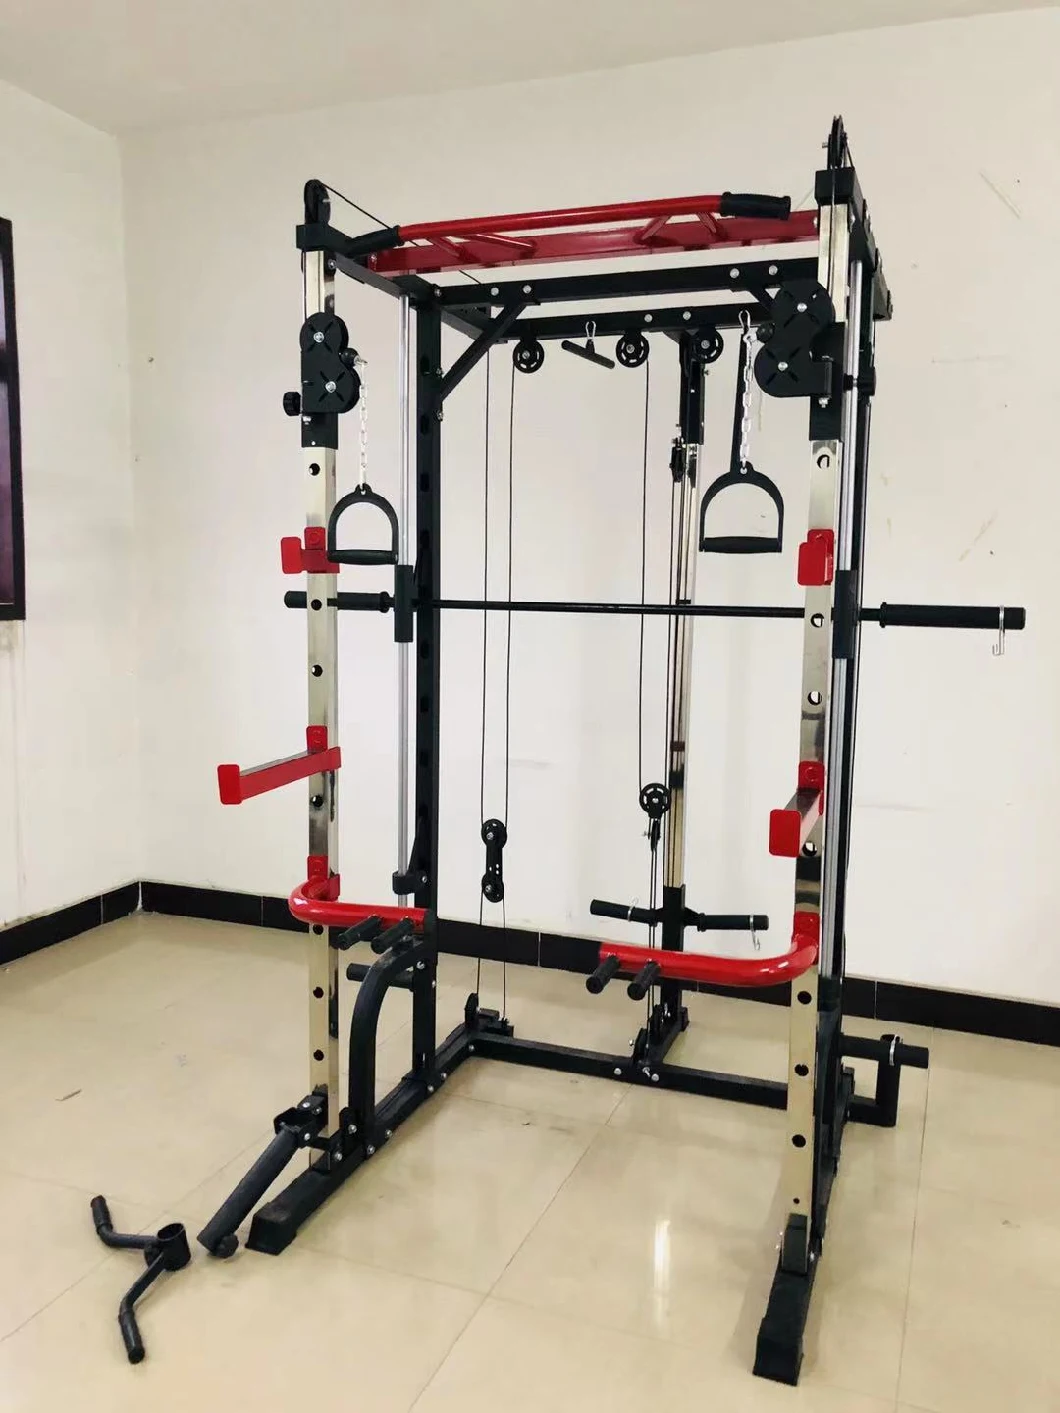 Home Gym Equipment Exercise Squat Rack Includes Smith Pull Attachment Multi-Grip Pull-up Bar Barrel Training Fitness Equipment